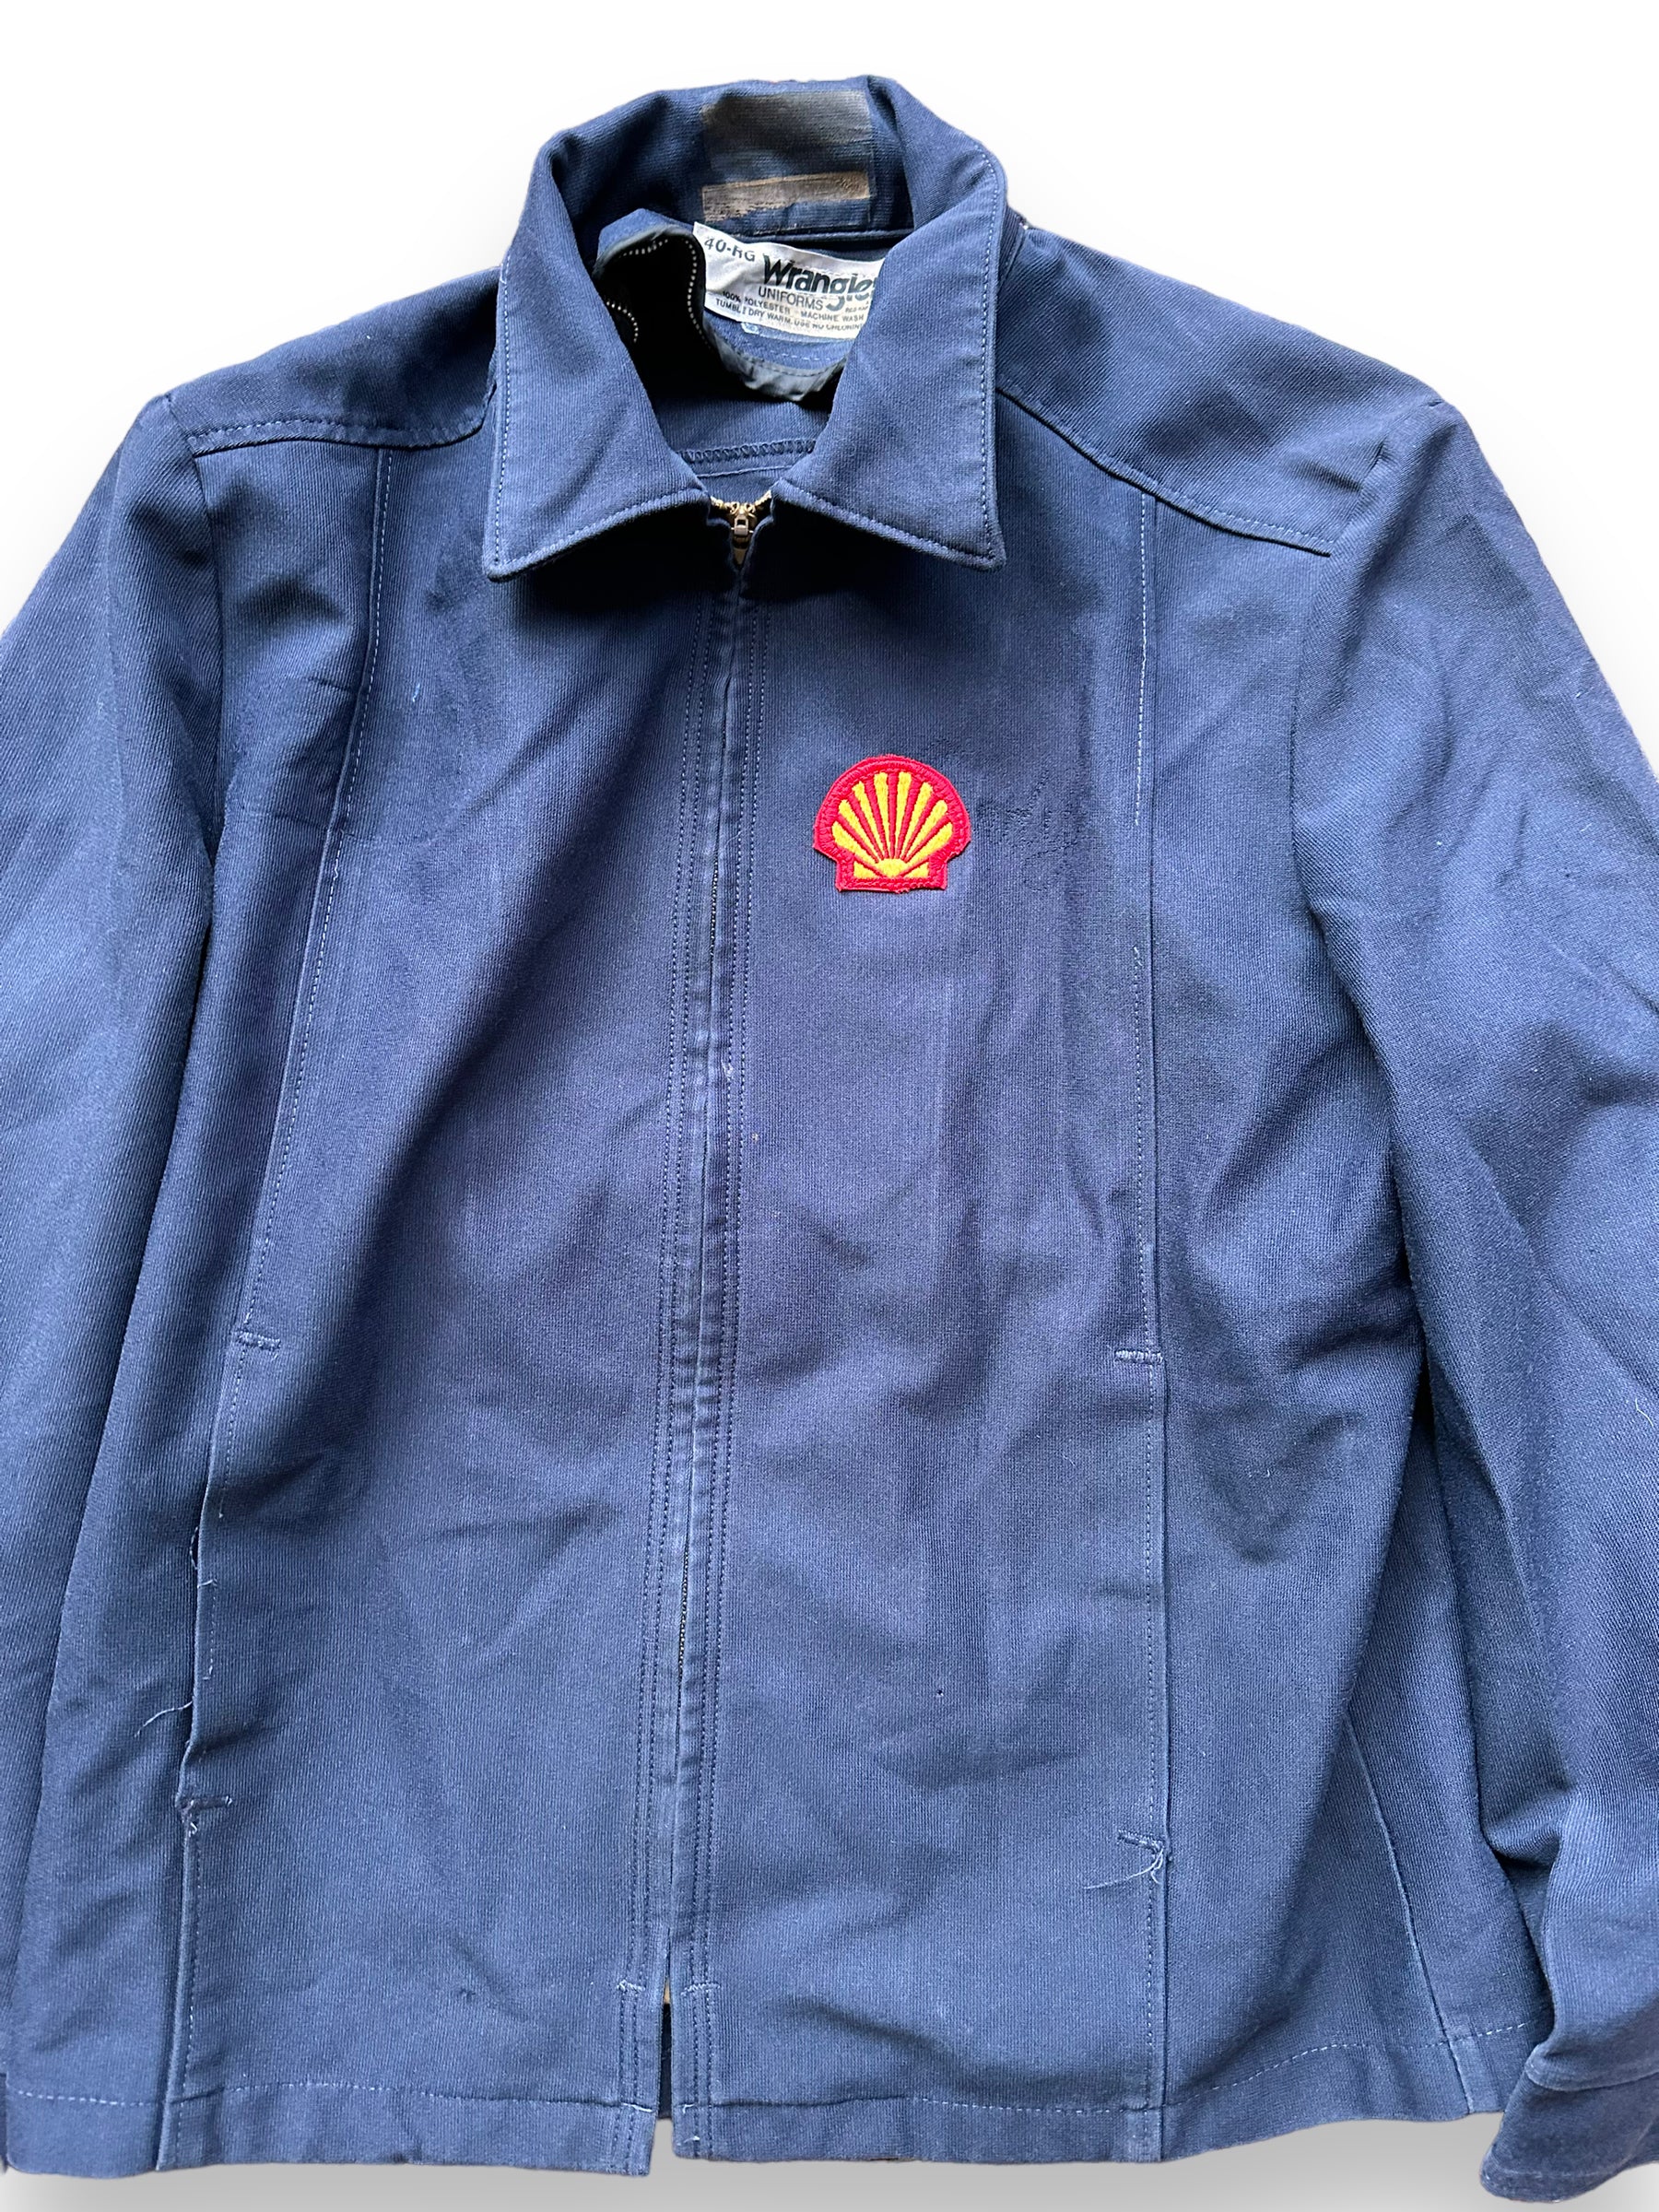 Vintage 90s shell jacket | Vintage clothing free shipping to USA